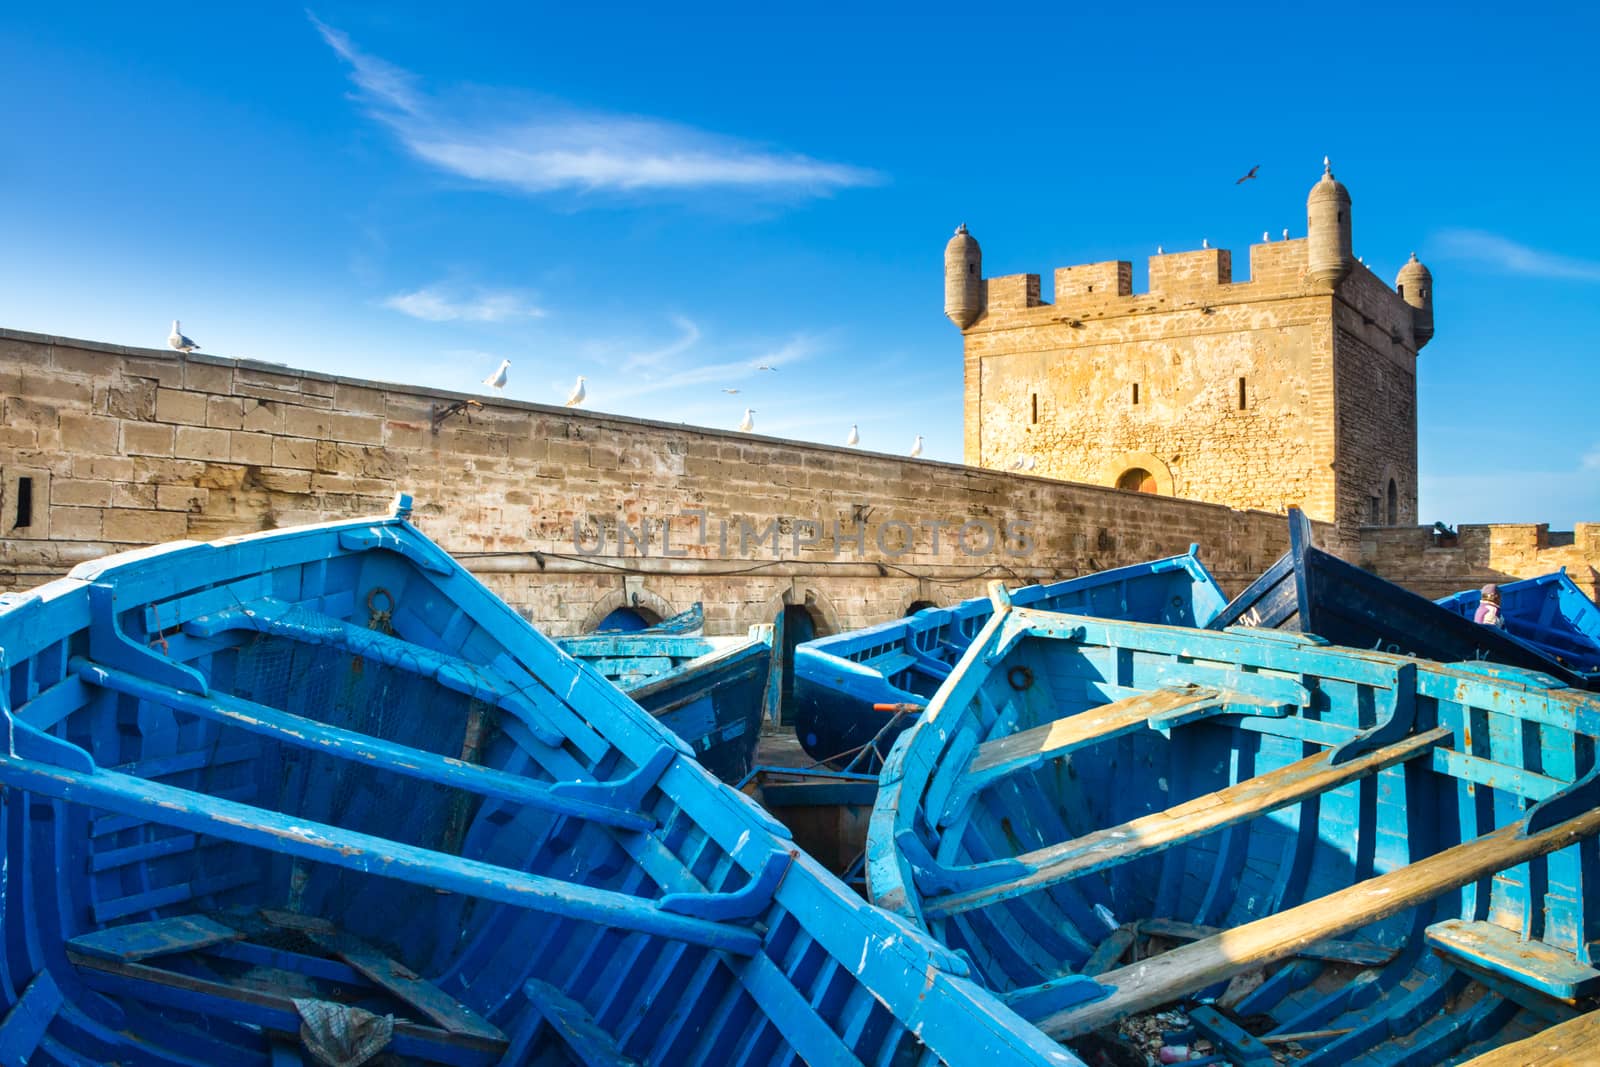 Fishermans boats in Essaouira, city in the western Morocco, on the Atlantic coast. It has also been known by its Portuguese name of Mogador. Morocco, north Africa.